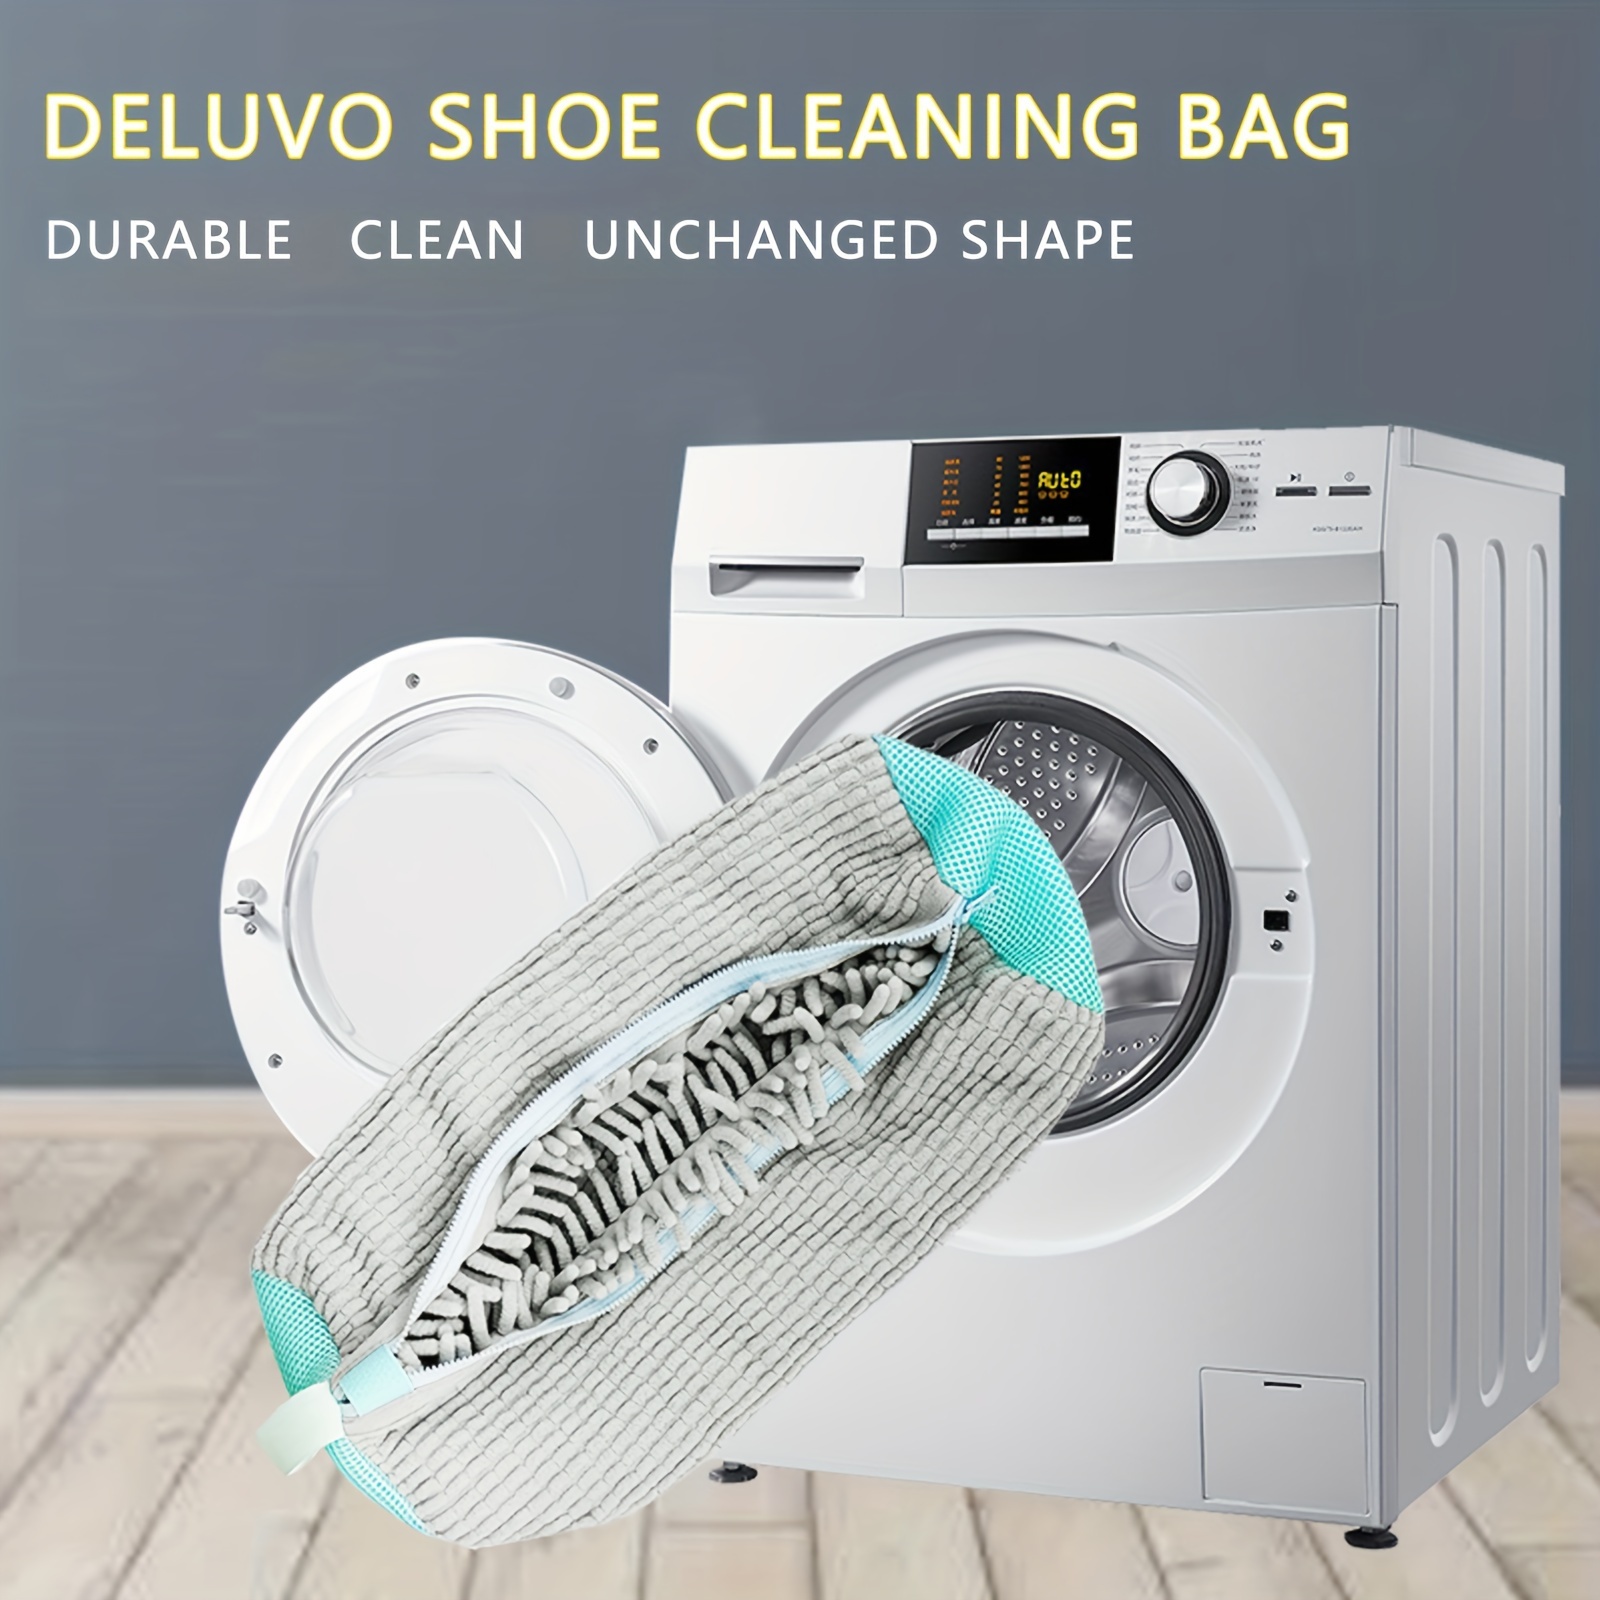 

1pc Deluvo Shoe Cleaning Bag, Deluvo , Deluvo Bag, Shoes Wash Bags, Sneaker Washing Bag, Shoe Cleaning Laundry, Reusable Shoe Washing Bag